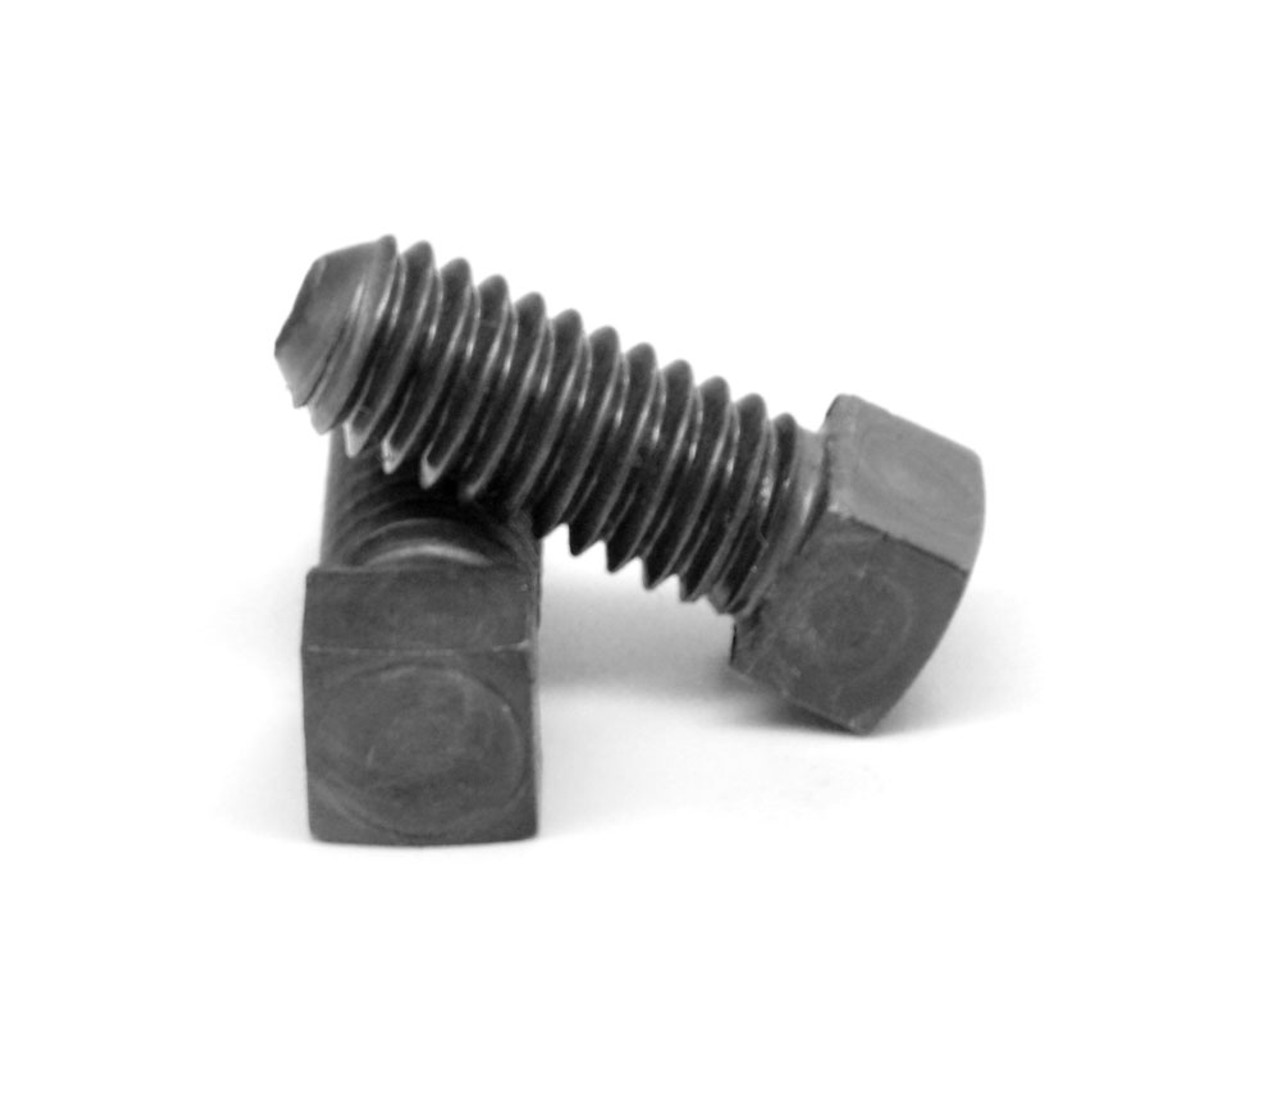 1 3/8"-6 x 2" (FT) Coarse Thread Square Head Set Screw Cup Point Low Carbon Steel Case Hardened Plain Finish